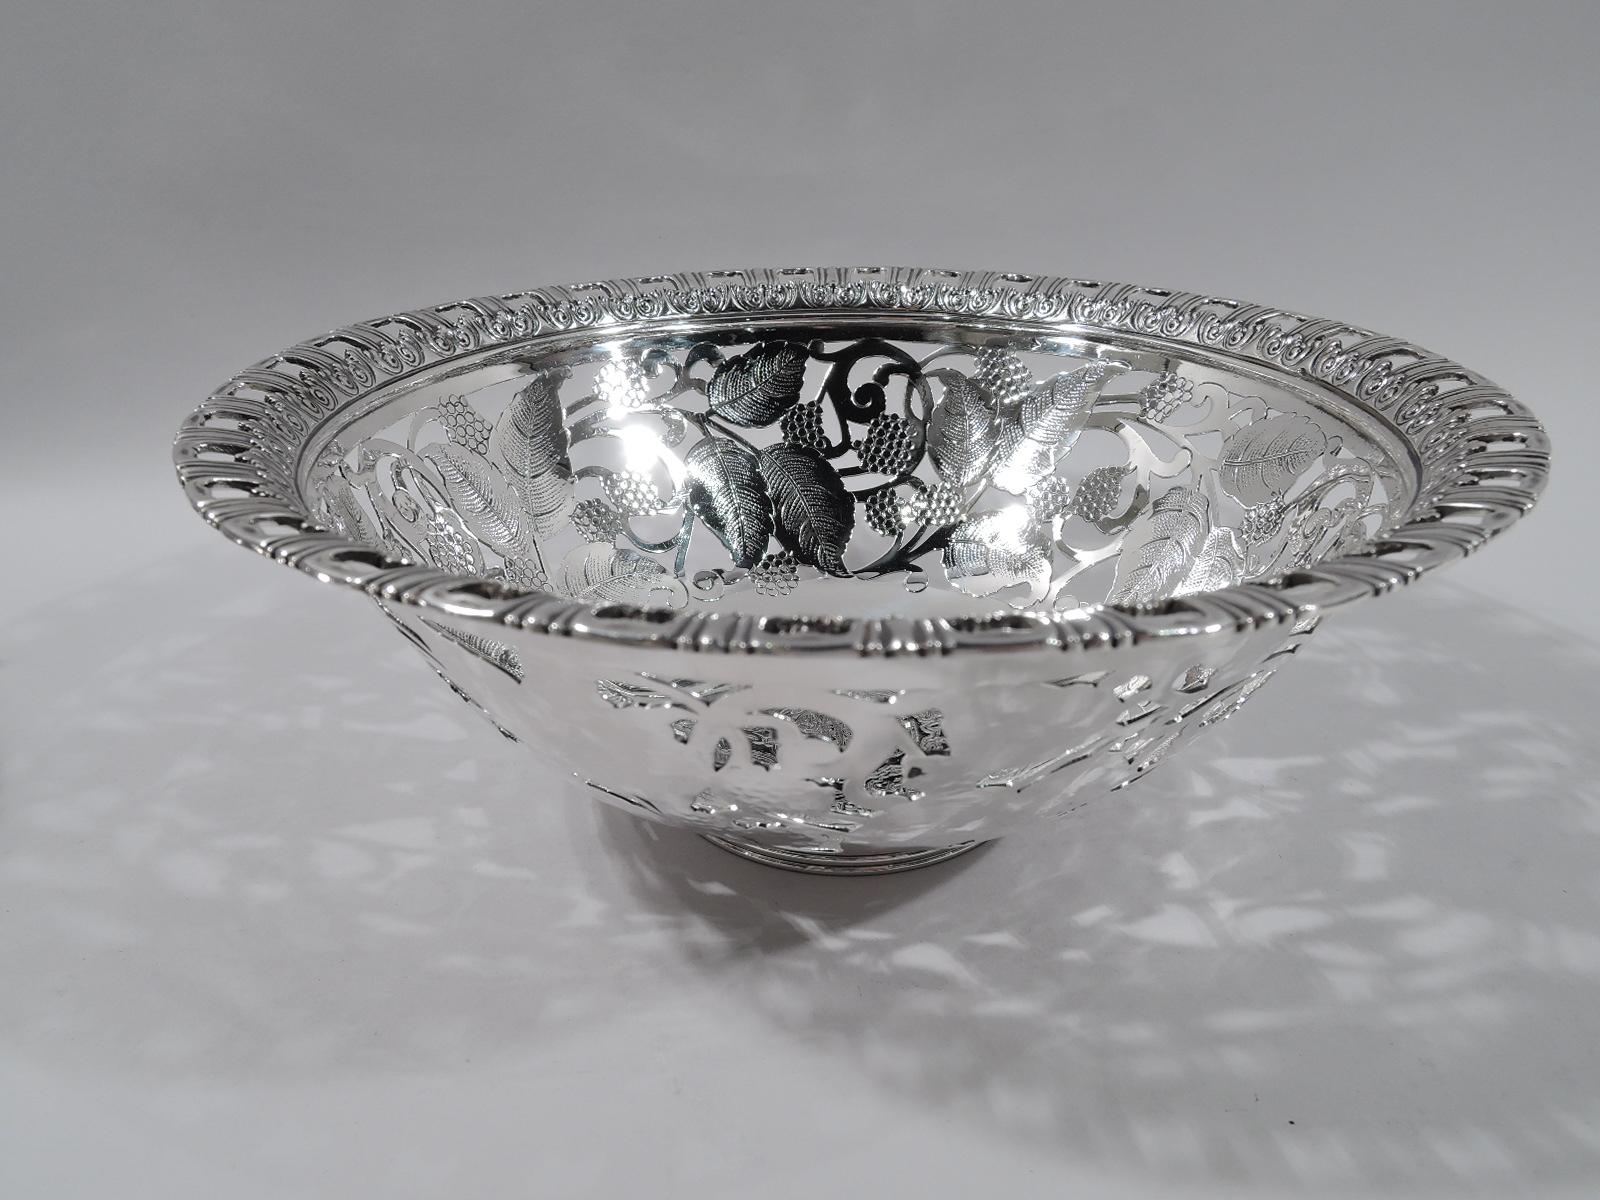 Edwardian sterling silver bowl. Made by Tiffany & Co. in New York. Round with solid well engraved with interlaced monogram in ornamental surround. Sides open and engraved with scrolling brambles. Pierced rim with leaf-and-dart and leaf borders.